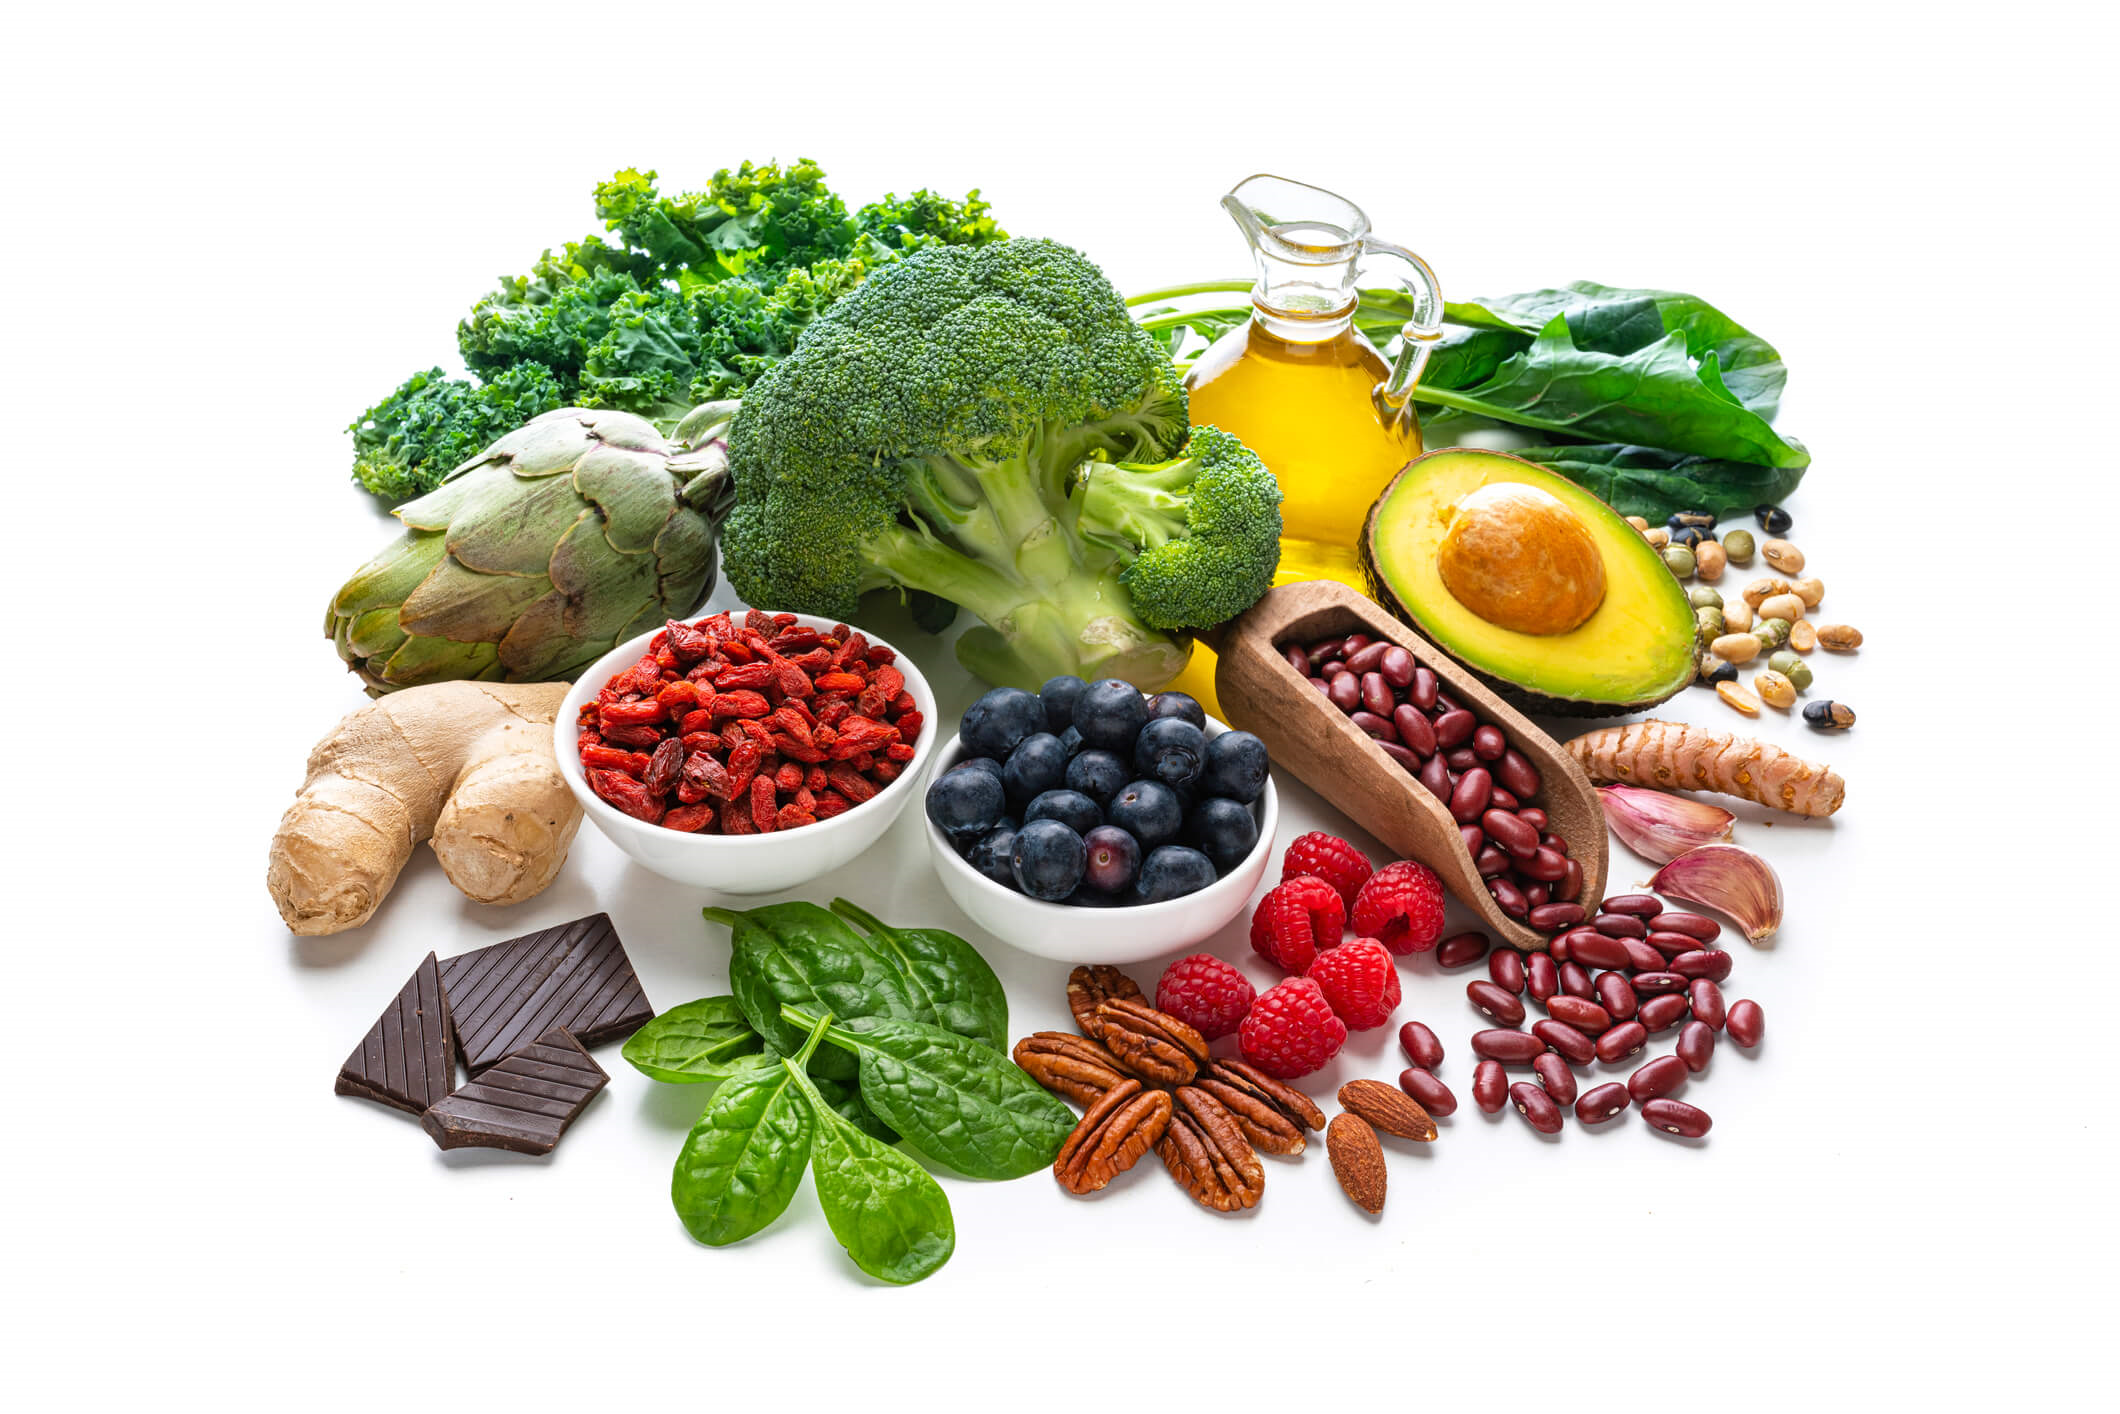 An assortment of foods that are high in antioxidants against a white background. The foods include broccoli, kidney bean, blueberries, raspberries, spinach, ginger, dark chocolate, kale, almonds, and artichoke